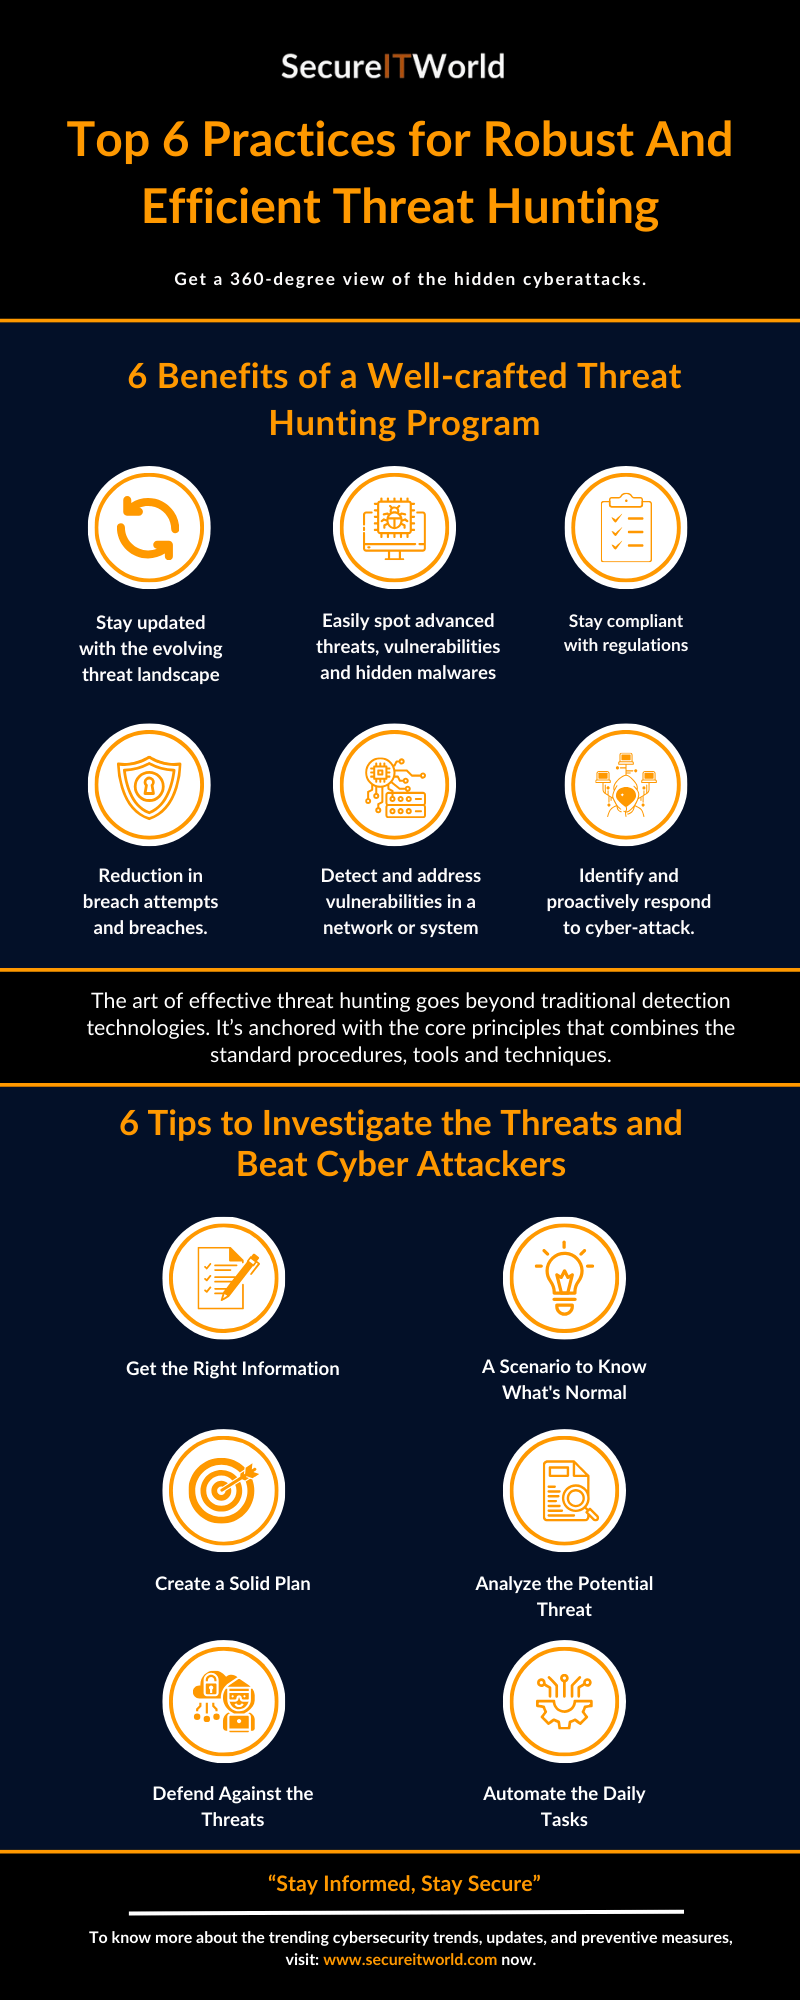 Top 6 Practices for Robust And Efficient Threat Hunting